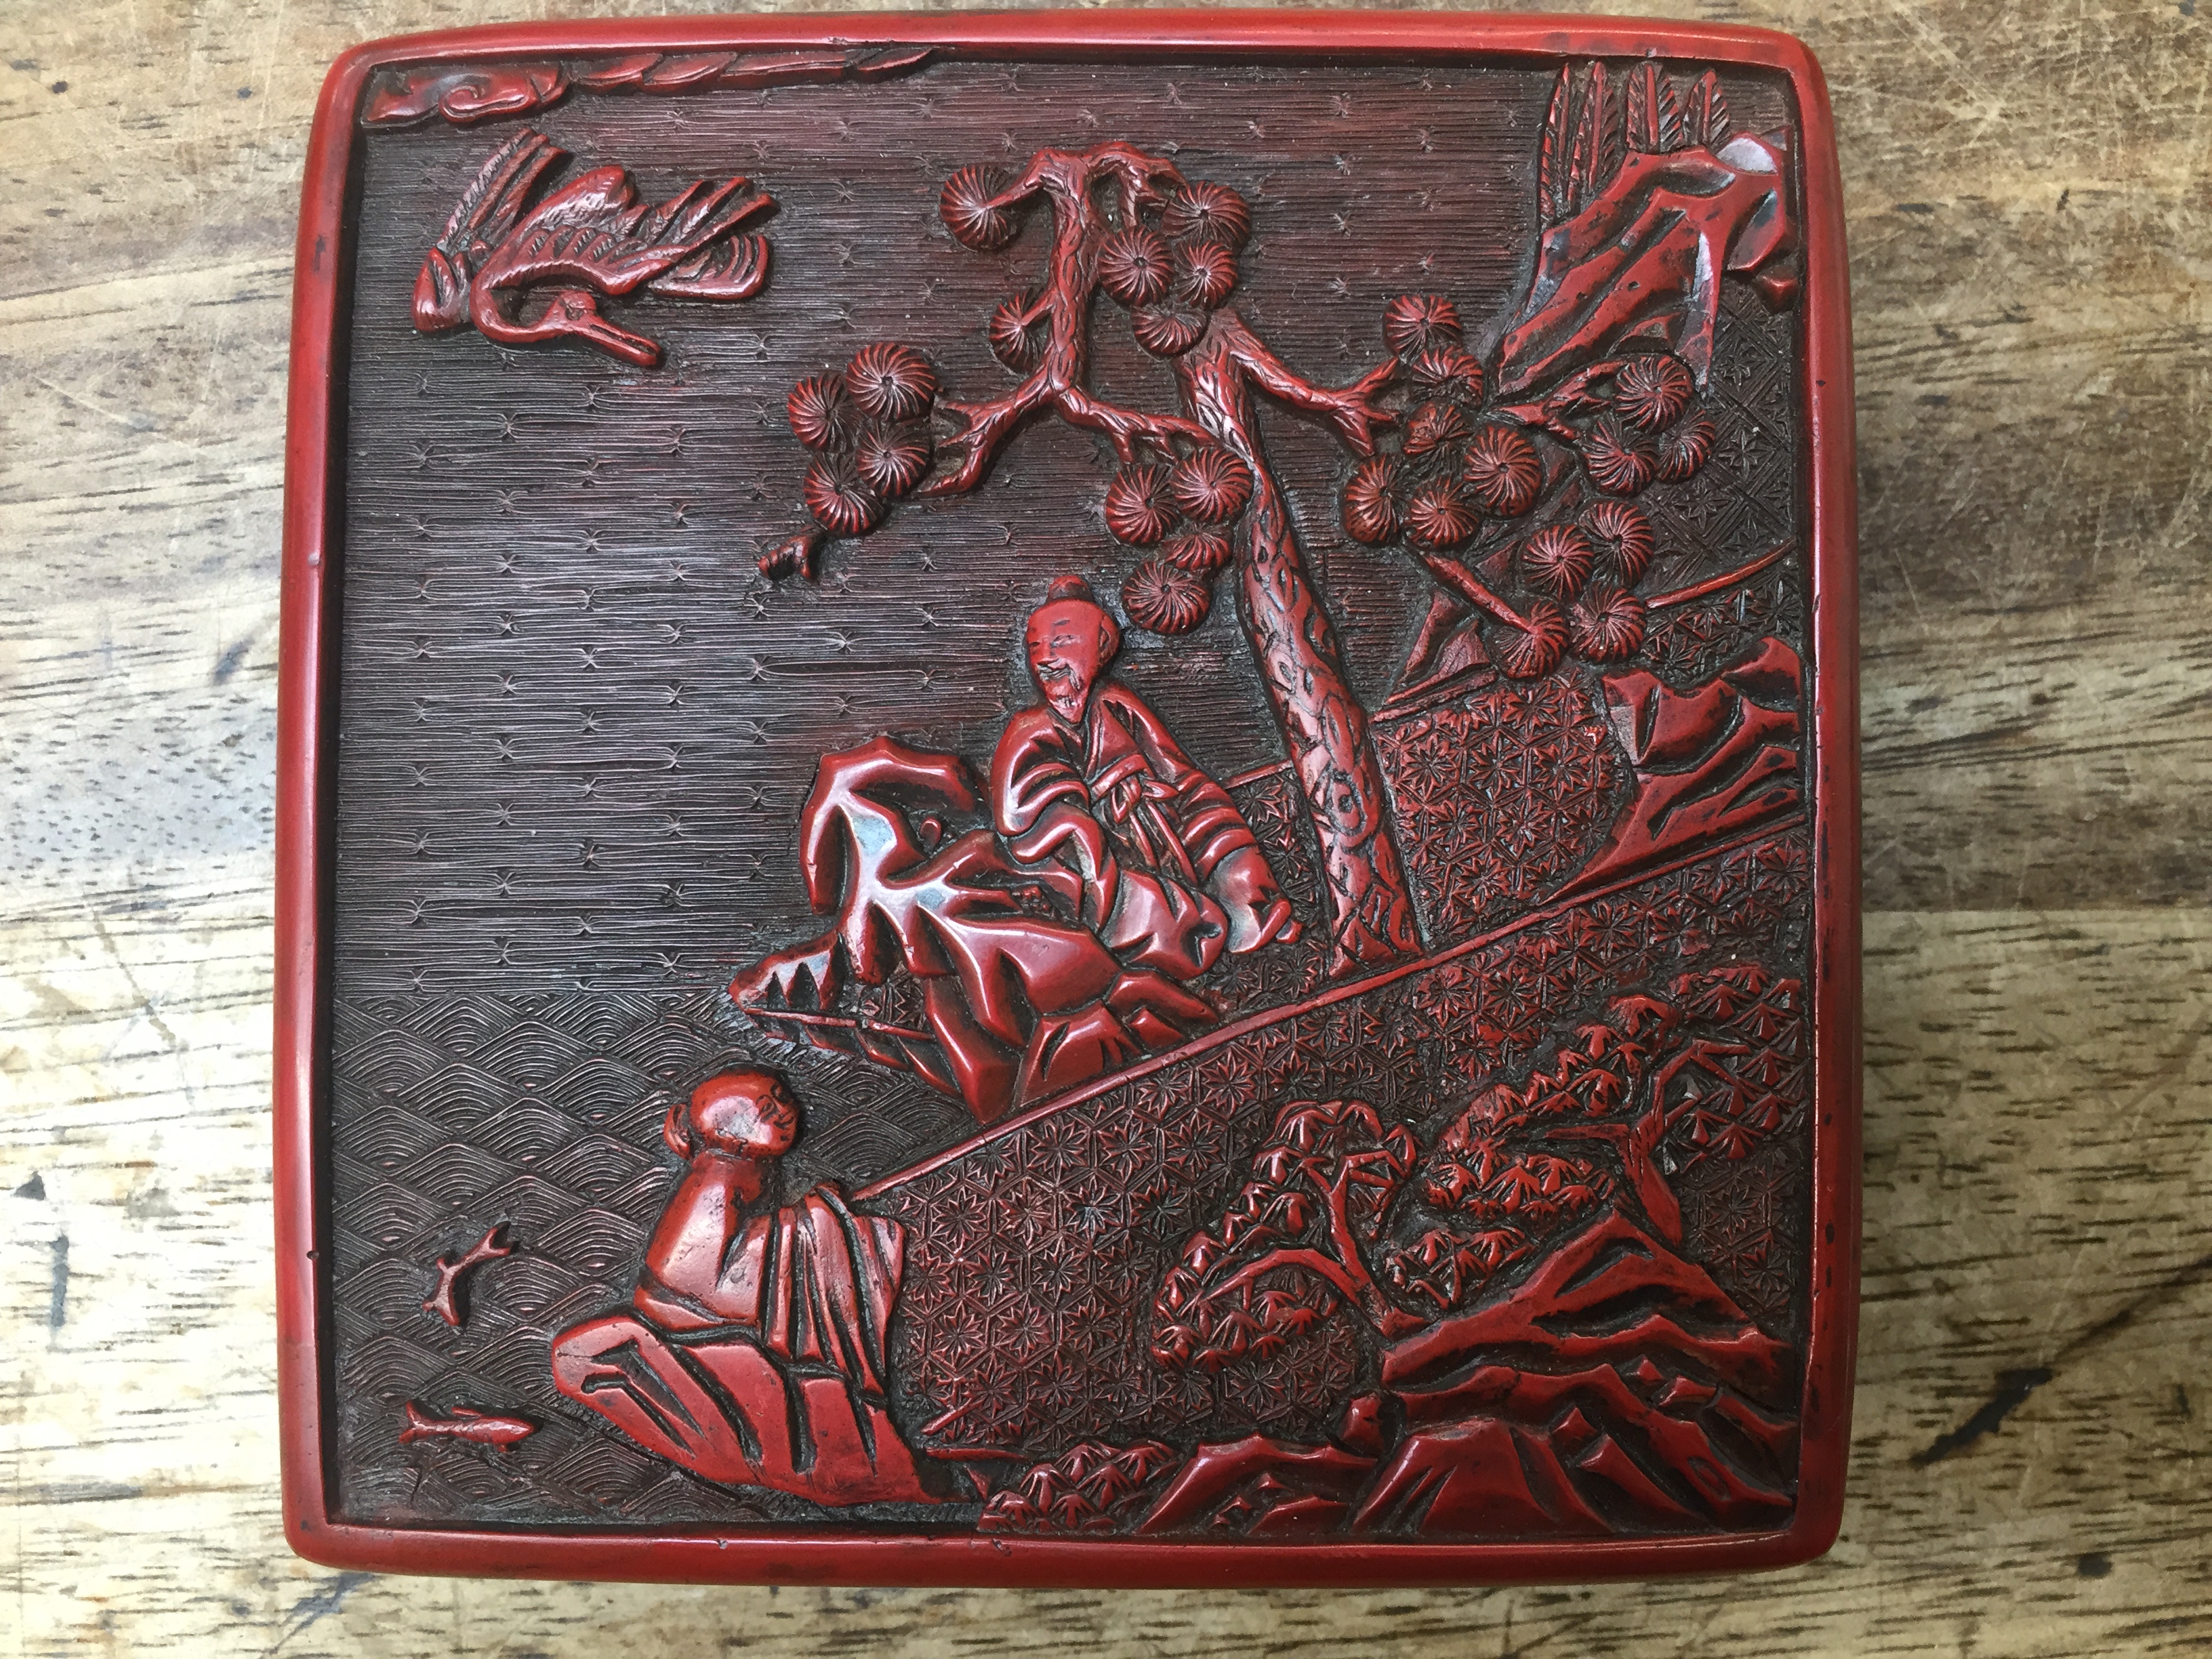 A CHINESE CINNABAR LACQUER TIERED BOX AND COVER 明 剔紅士大夫圖紋四層蓋盒 - Image 4 of 38